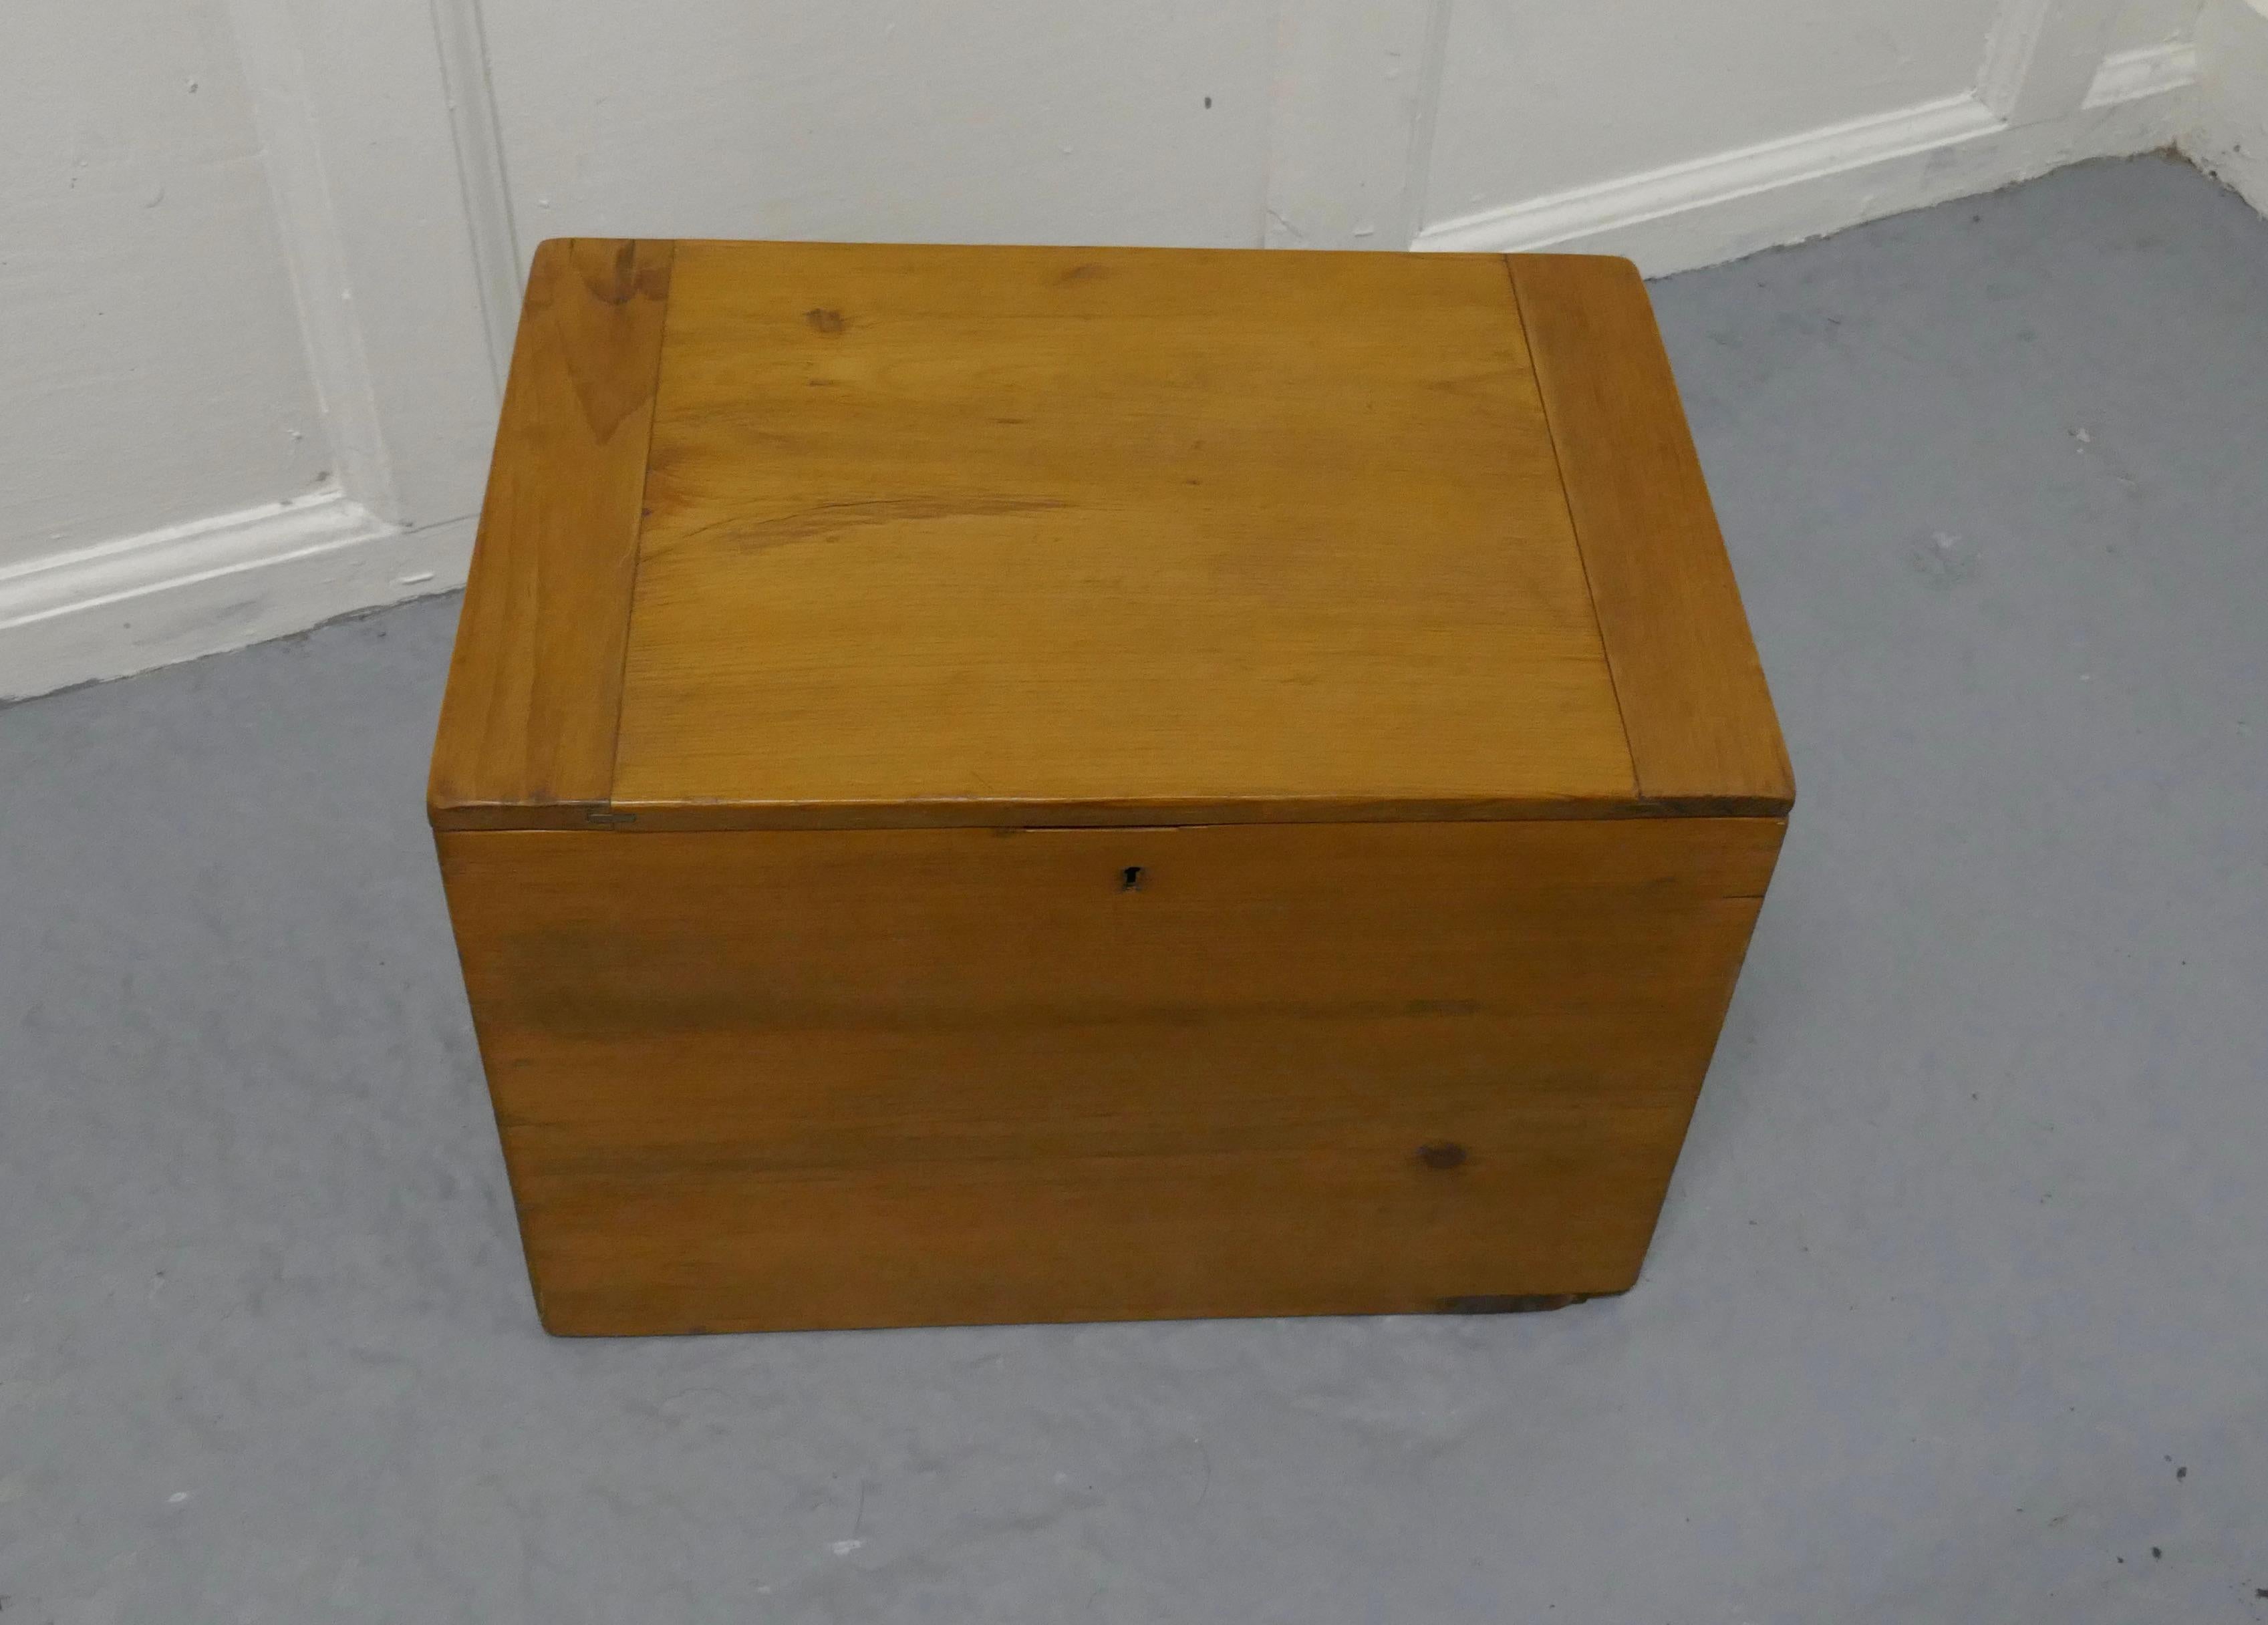 Small Victorian pine stationary box or treasure chest

This good quality box has a cleated top, it has been stripped and waxed
A good quality small chest is of very solid construction and in very good condition
The box measures: 15